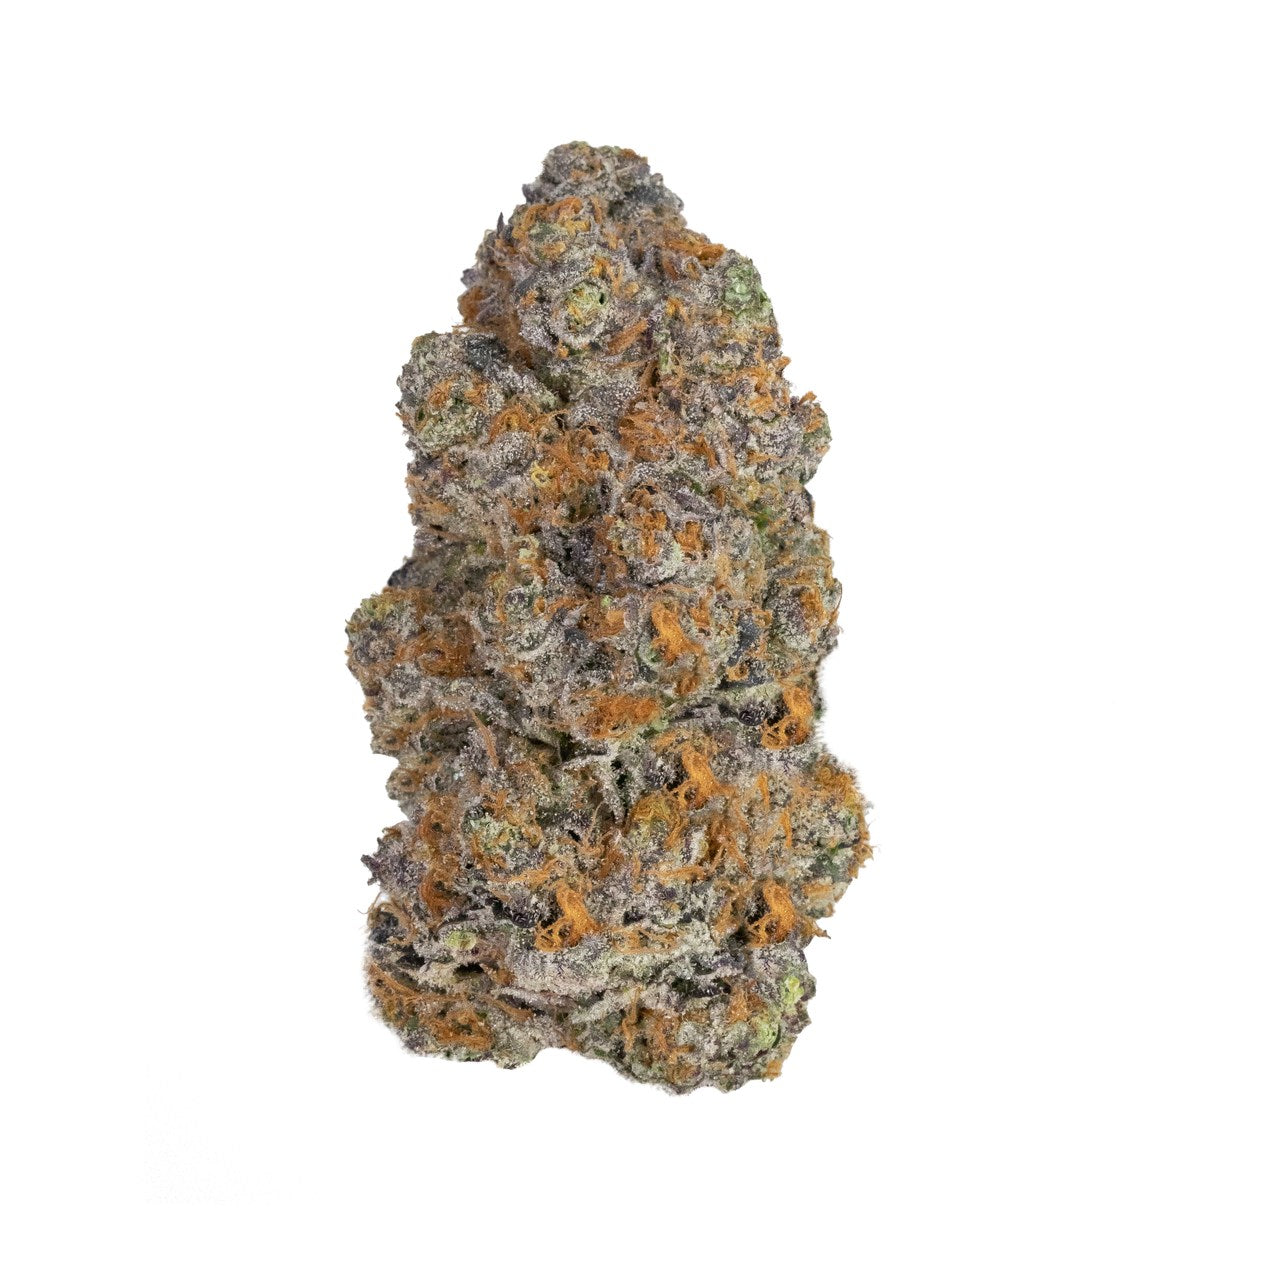 A nug of cannabis flower from the Biscotti weed strain sits against a white background.